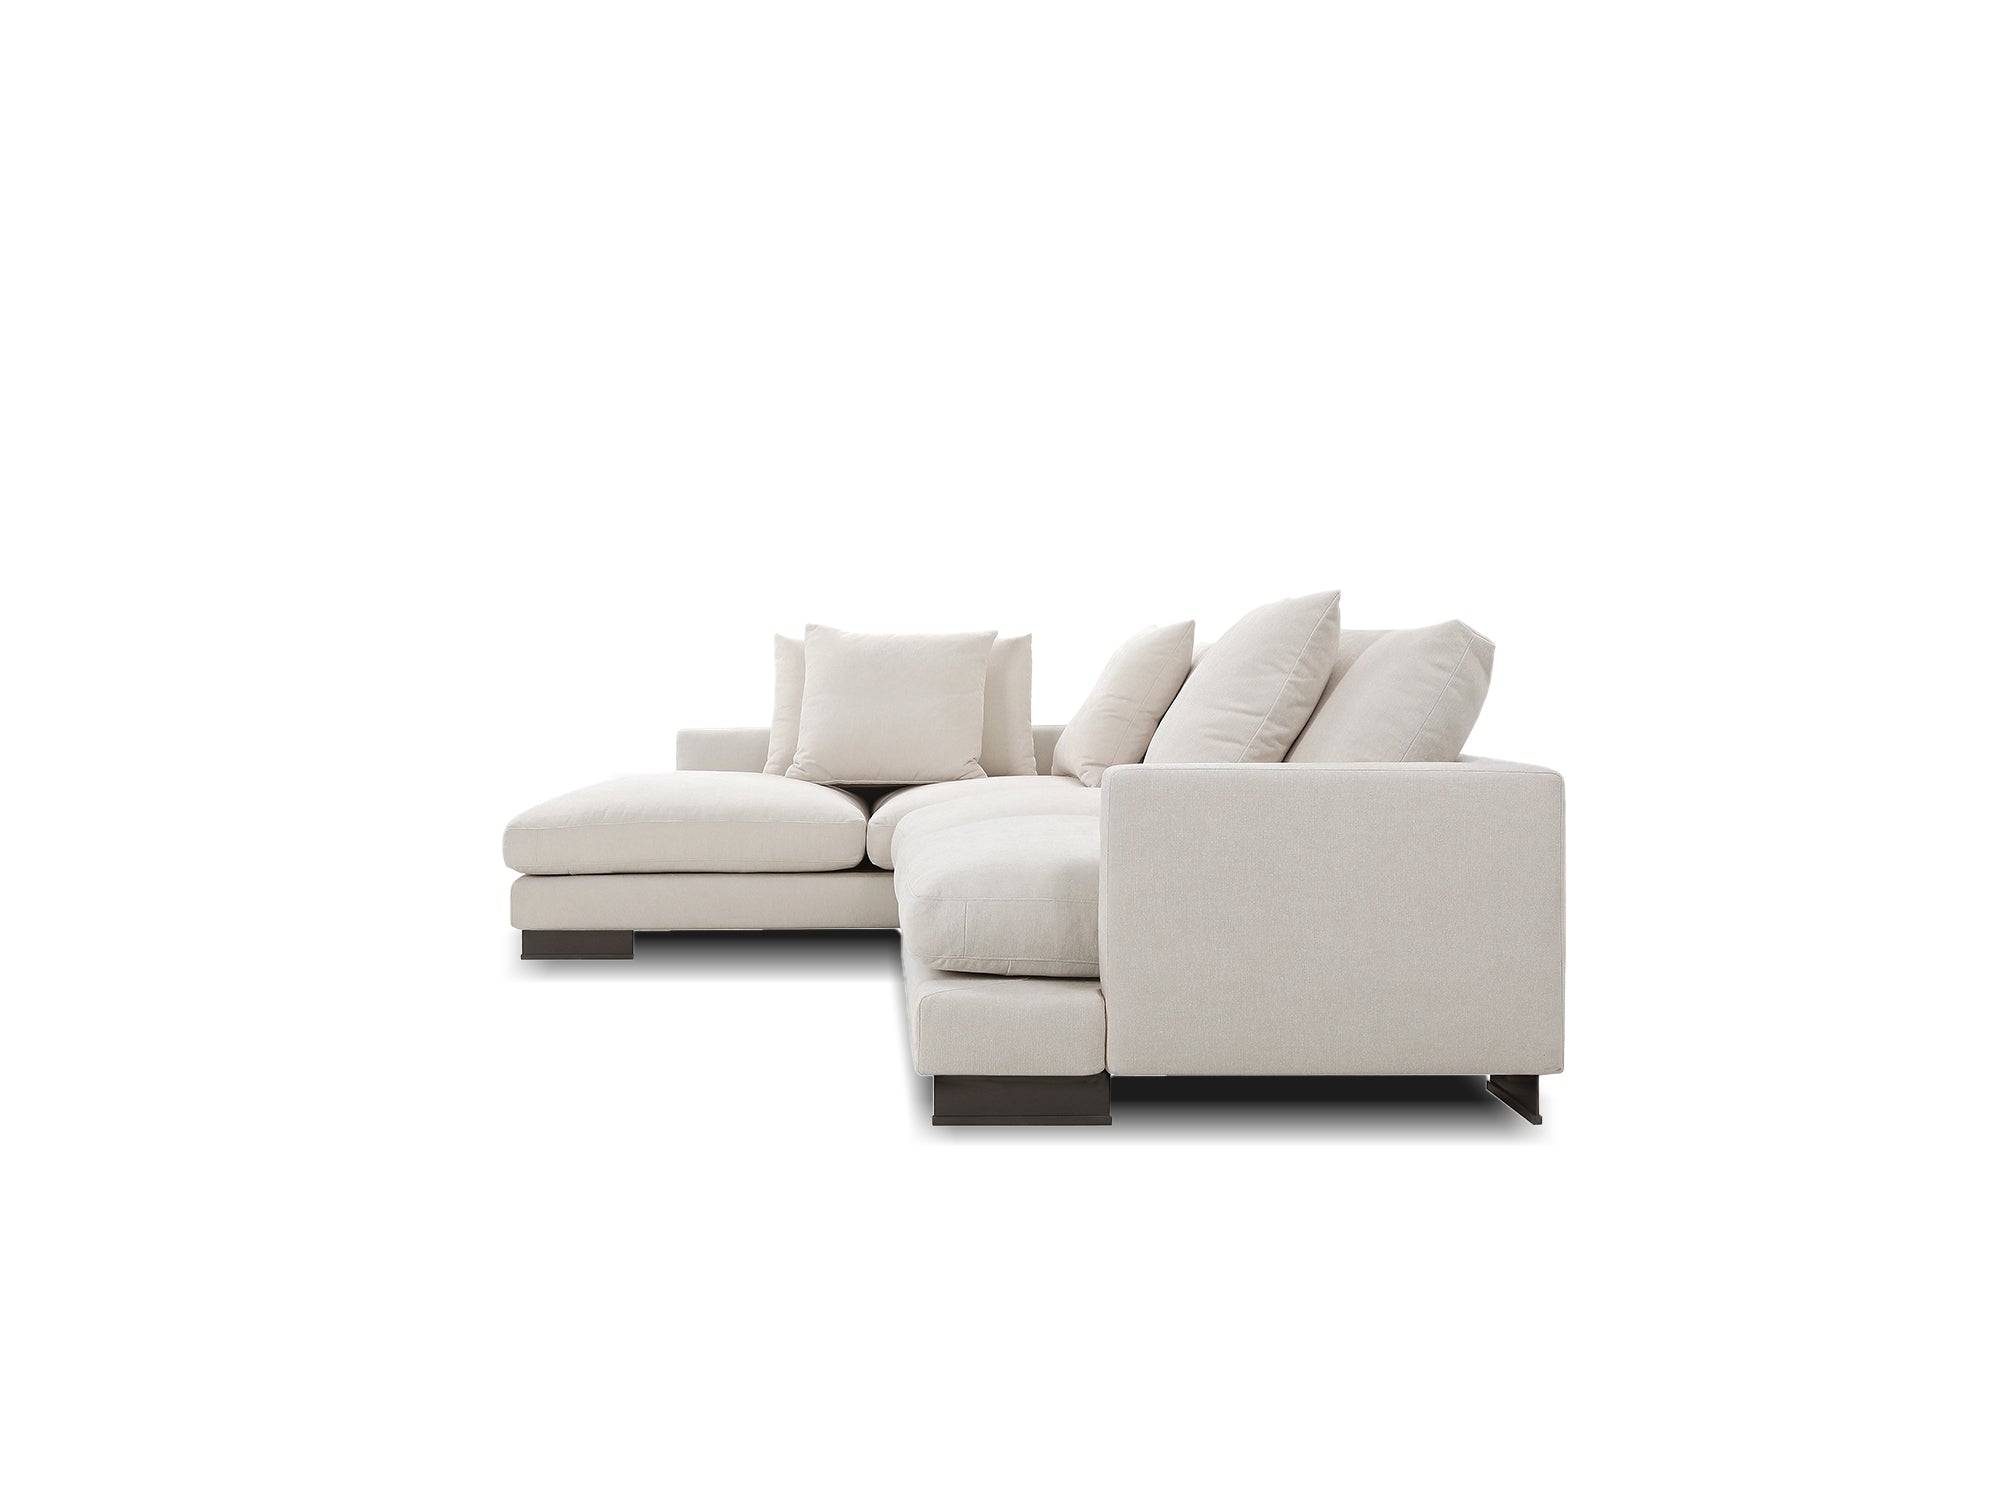 Weekender Fabric Sectional